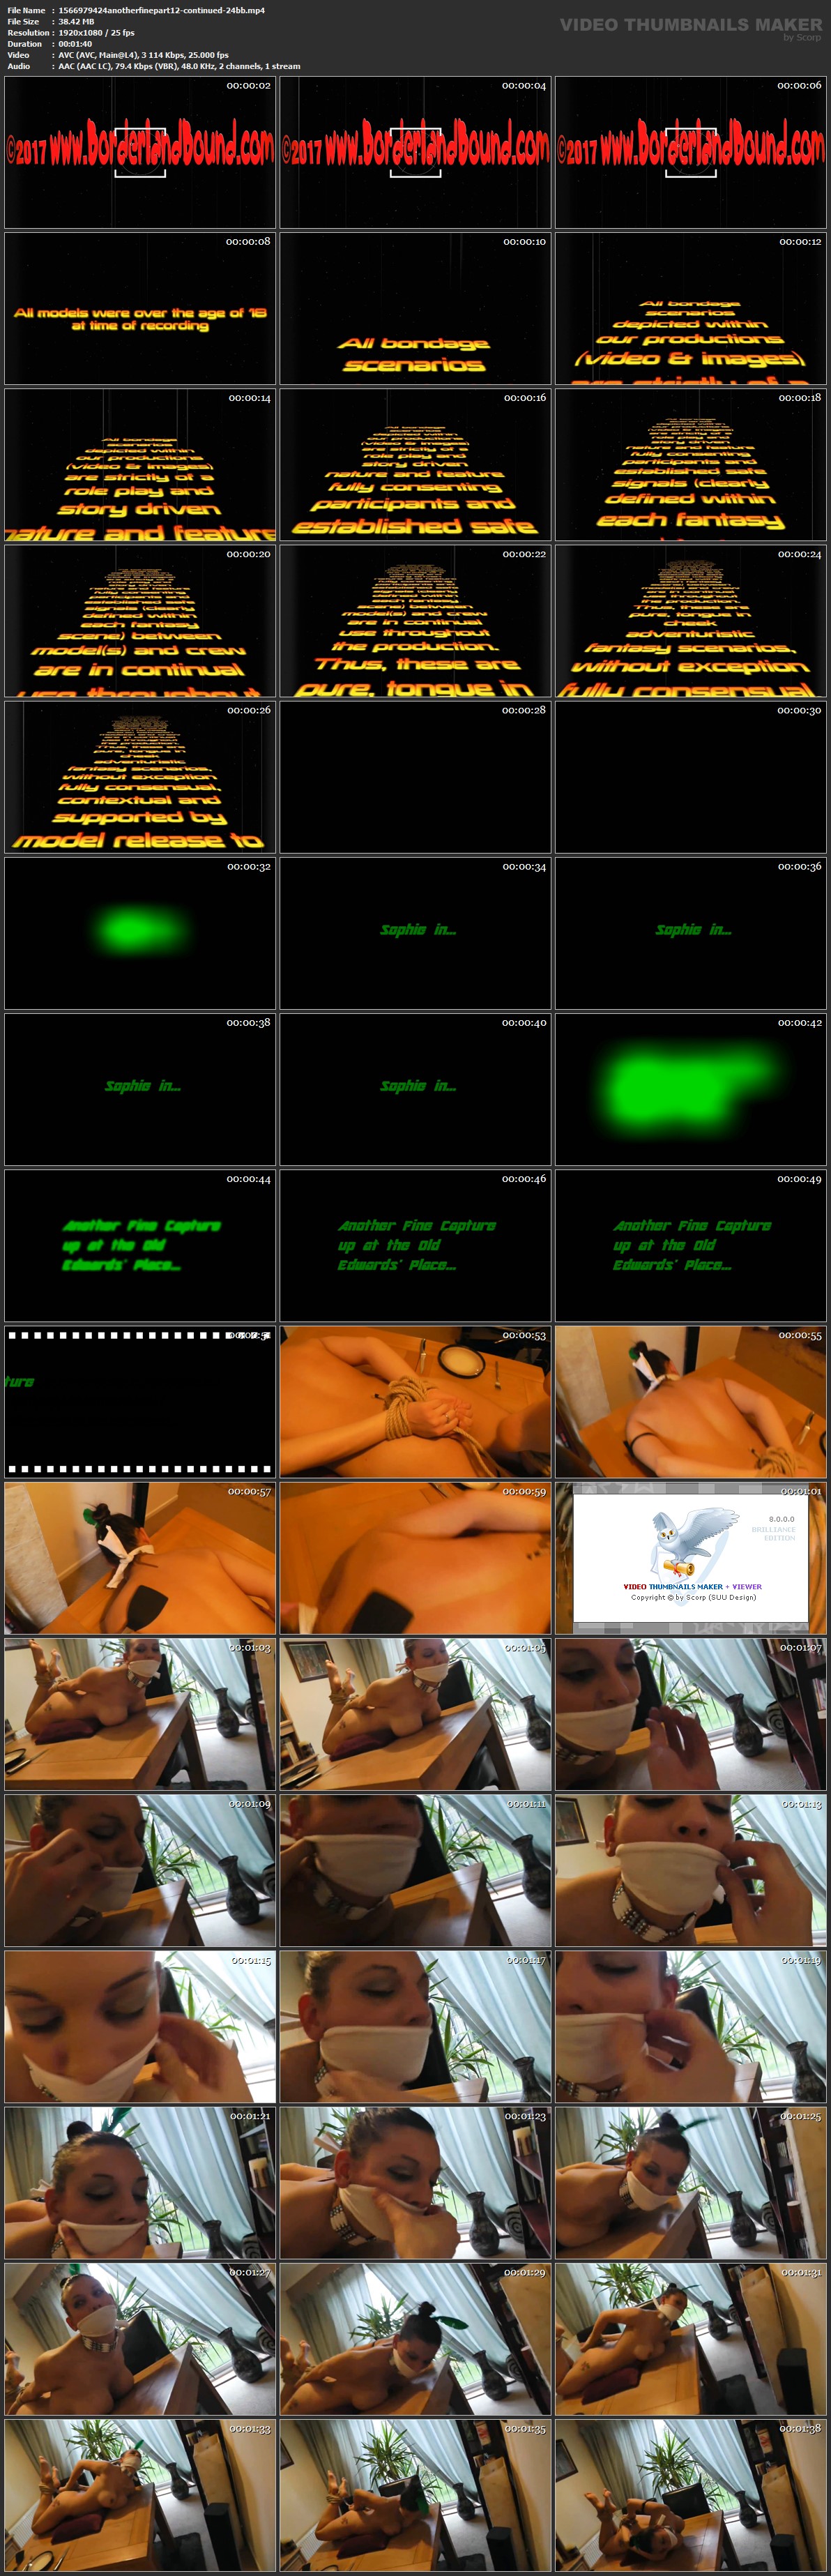 1566979424 anotherfinepart 12 continued 24 bb mp 4